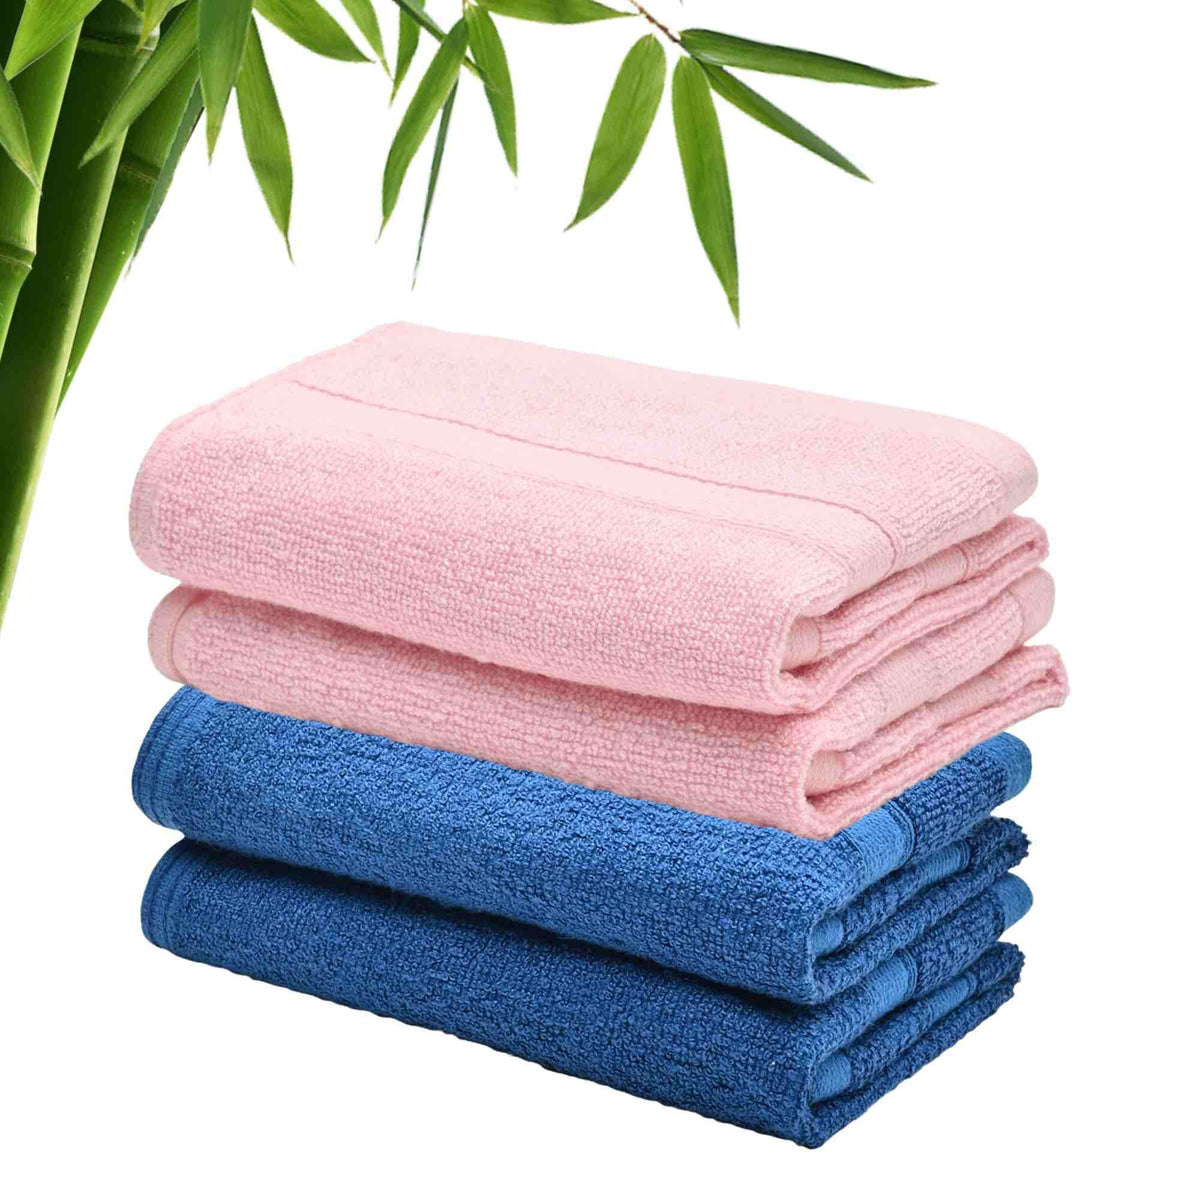 The Better Home 600GSM 100% Bamboo Face Towel Set | Anti Odour & Anti Bacterial Bamboo Towel |30cm X 30cm | Ultra Absorbent & Quick Drying Face Towel for Women & Men (Pack of 4, Blue + Pink)